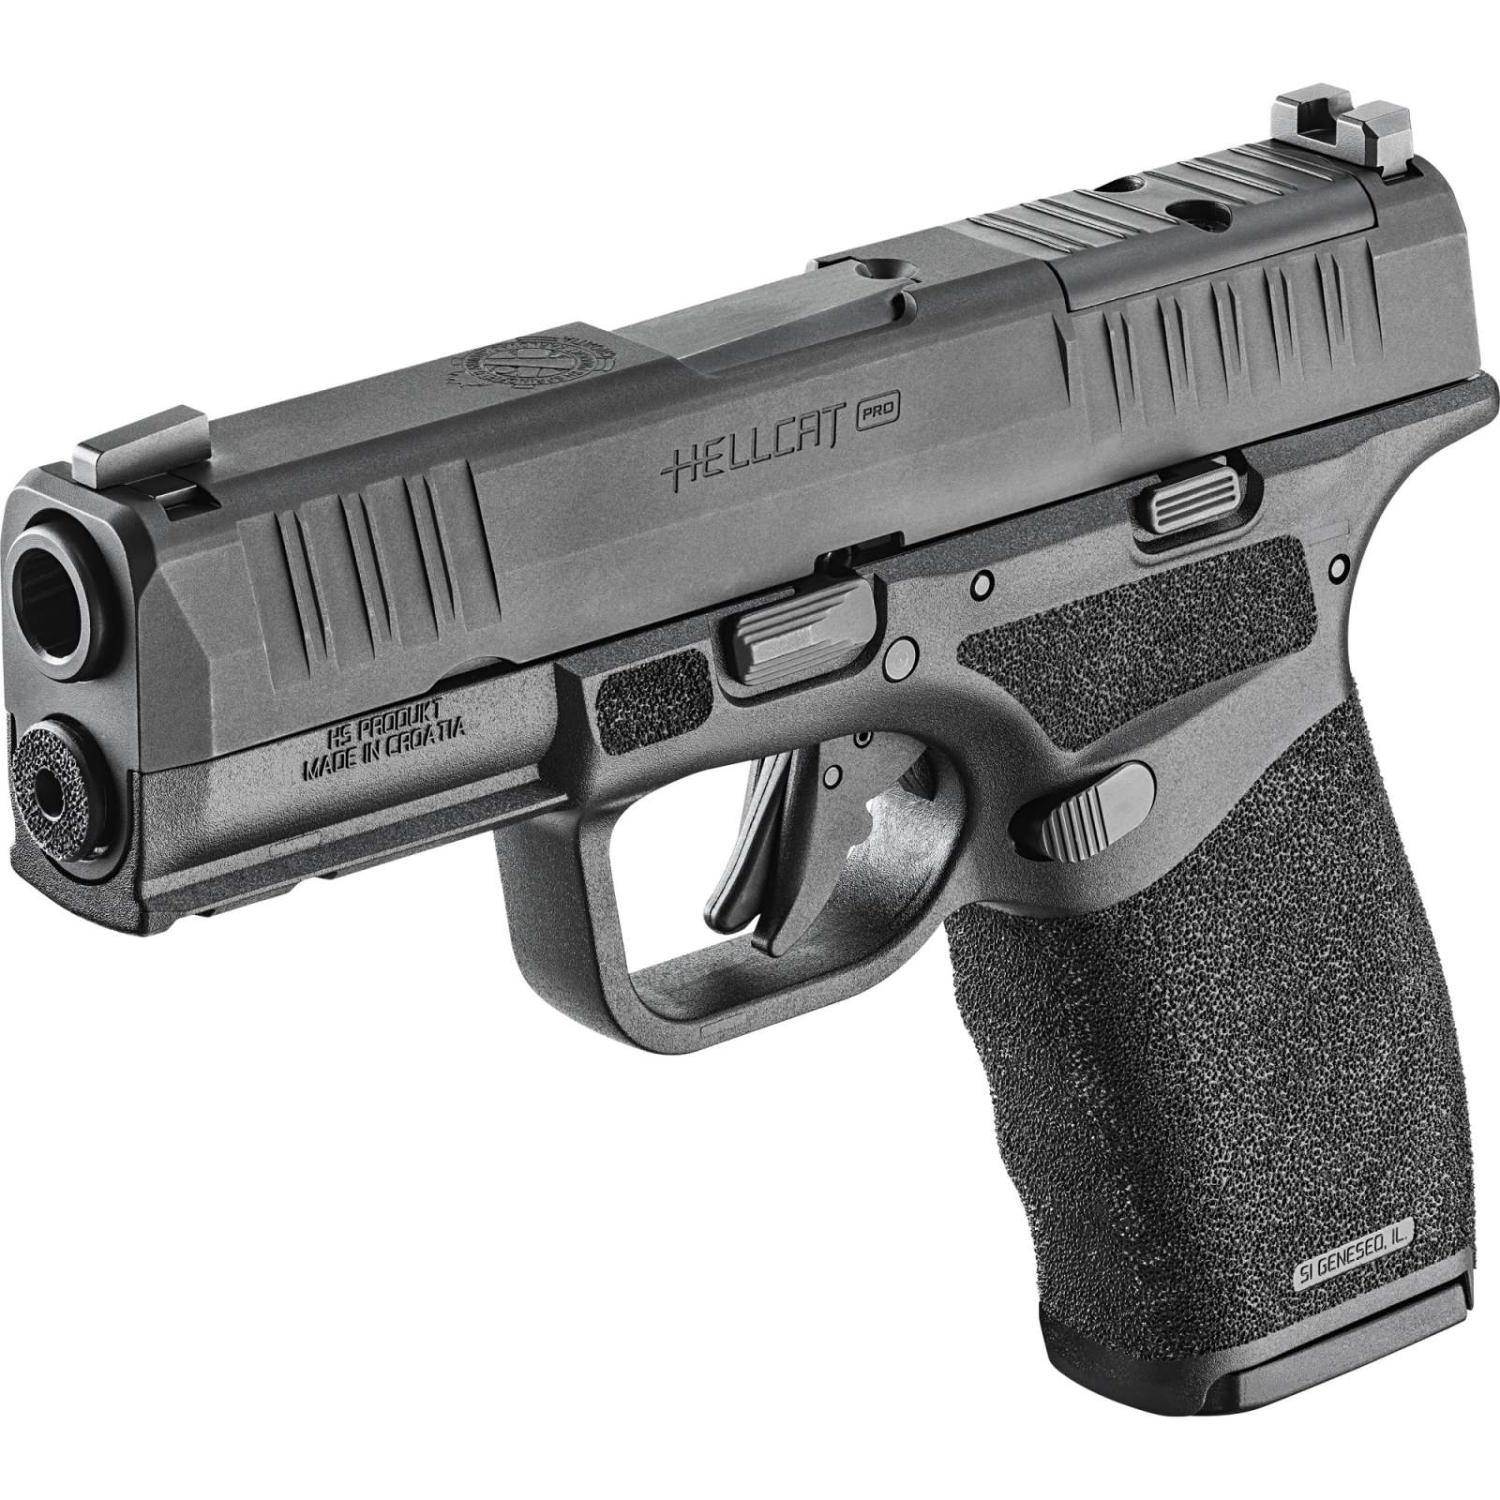 Springfield Armory Hellcat Pro 9mm 3.7" Barrel 15-Rounds Manual Safety - $515.55